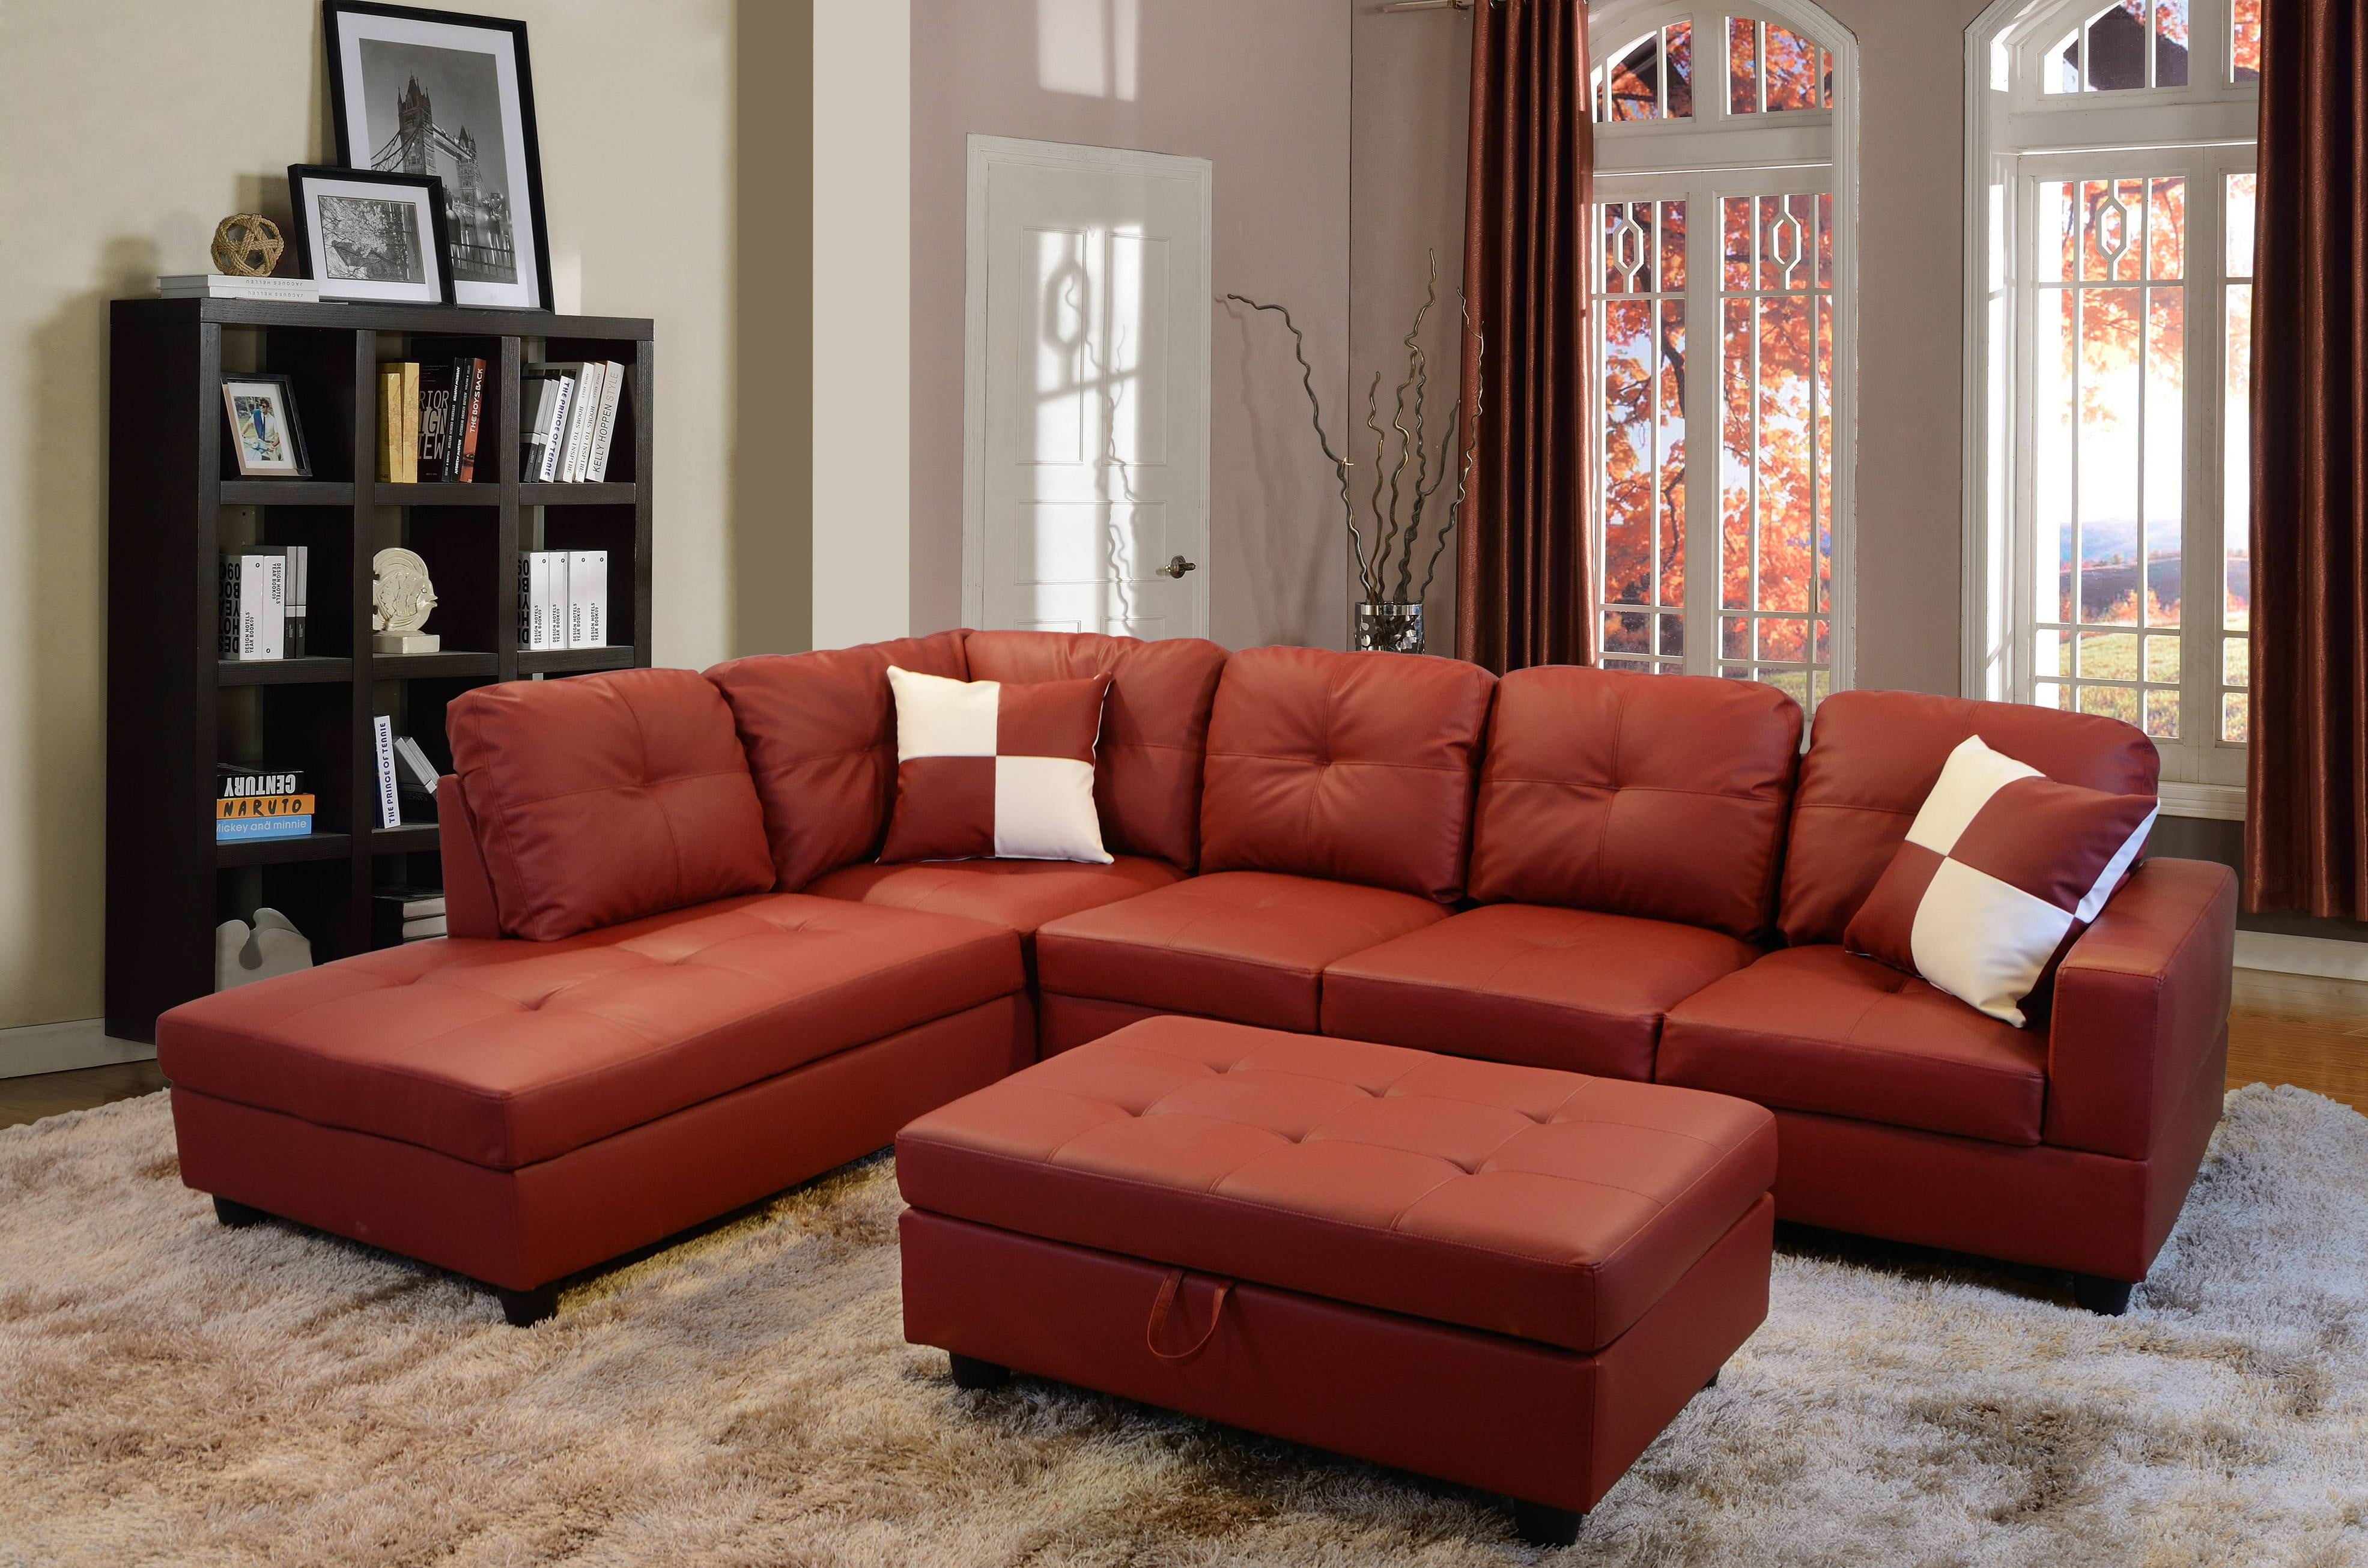 imitation soft leather couch sofa